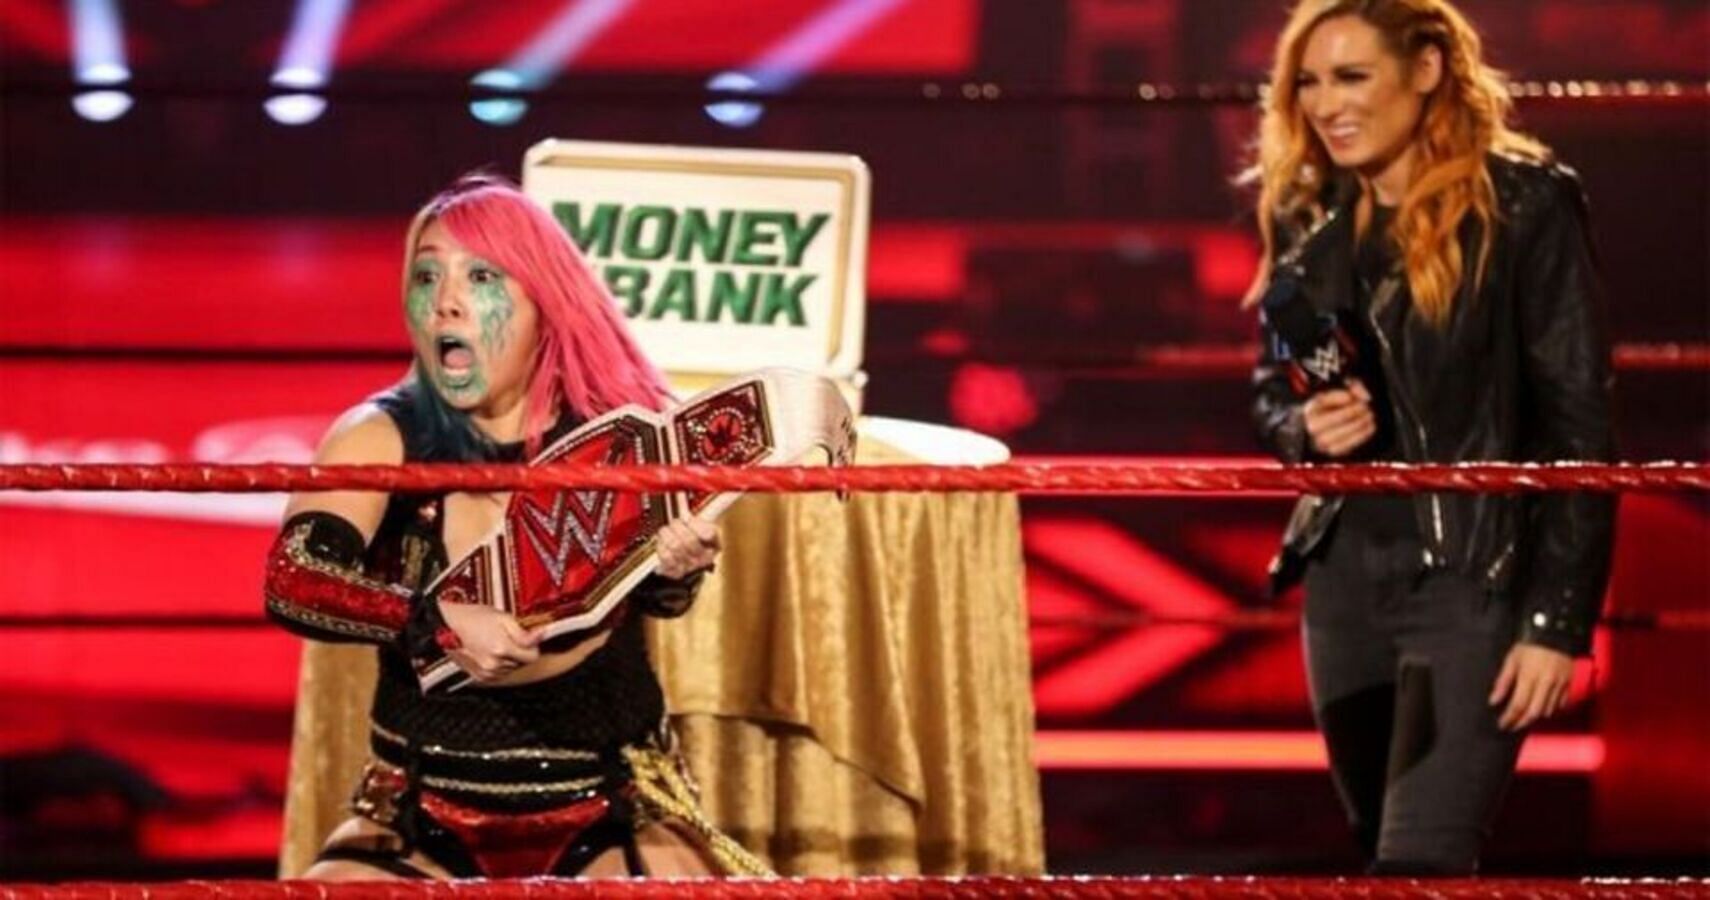 Asuka was awarded the Raw Women's Championship when Becky Lynch was pregnant